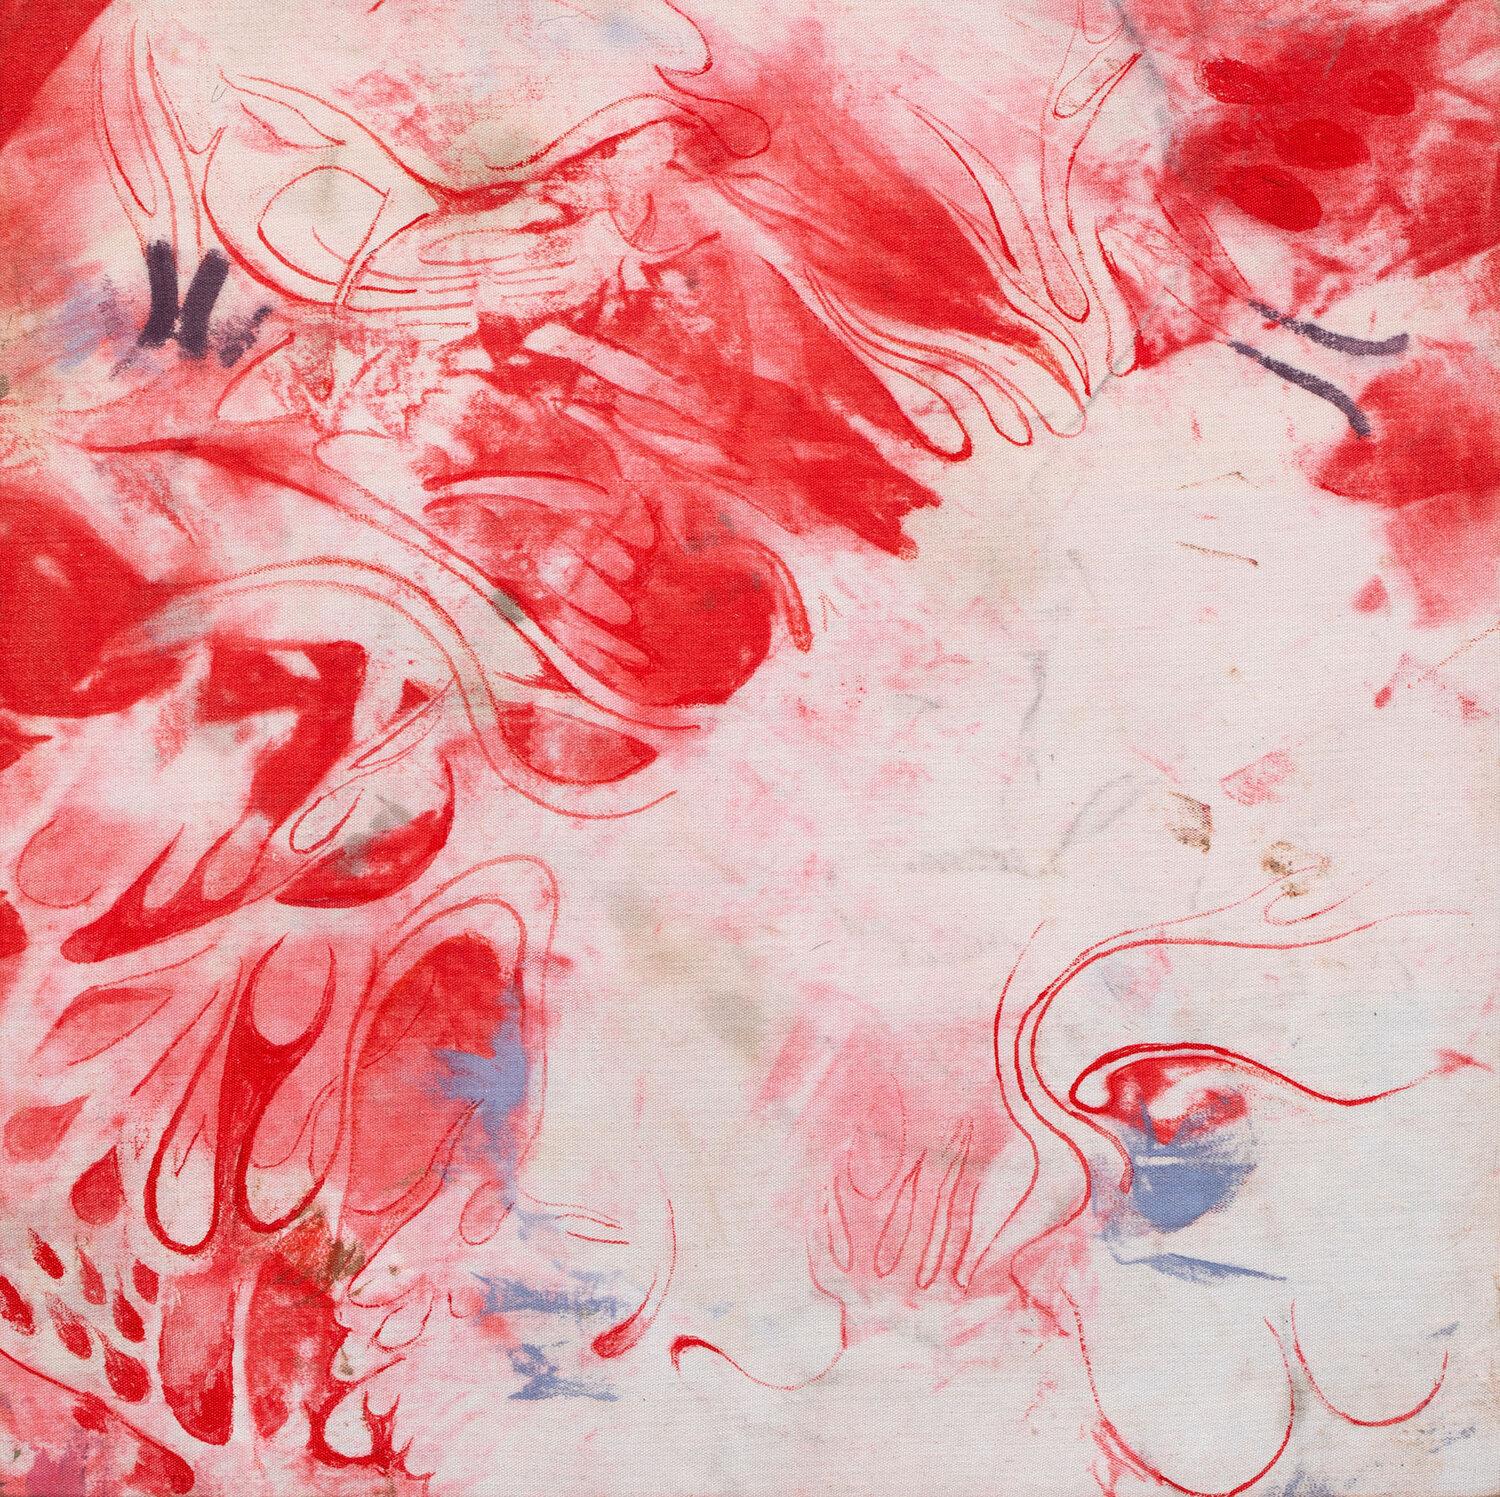 Tokyo Fire, abstracted flames, red and white painting